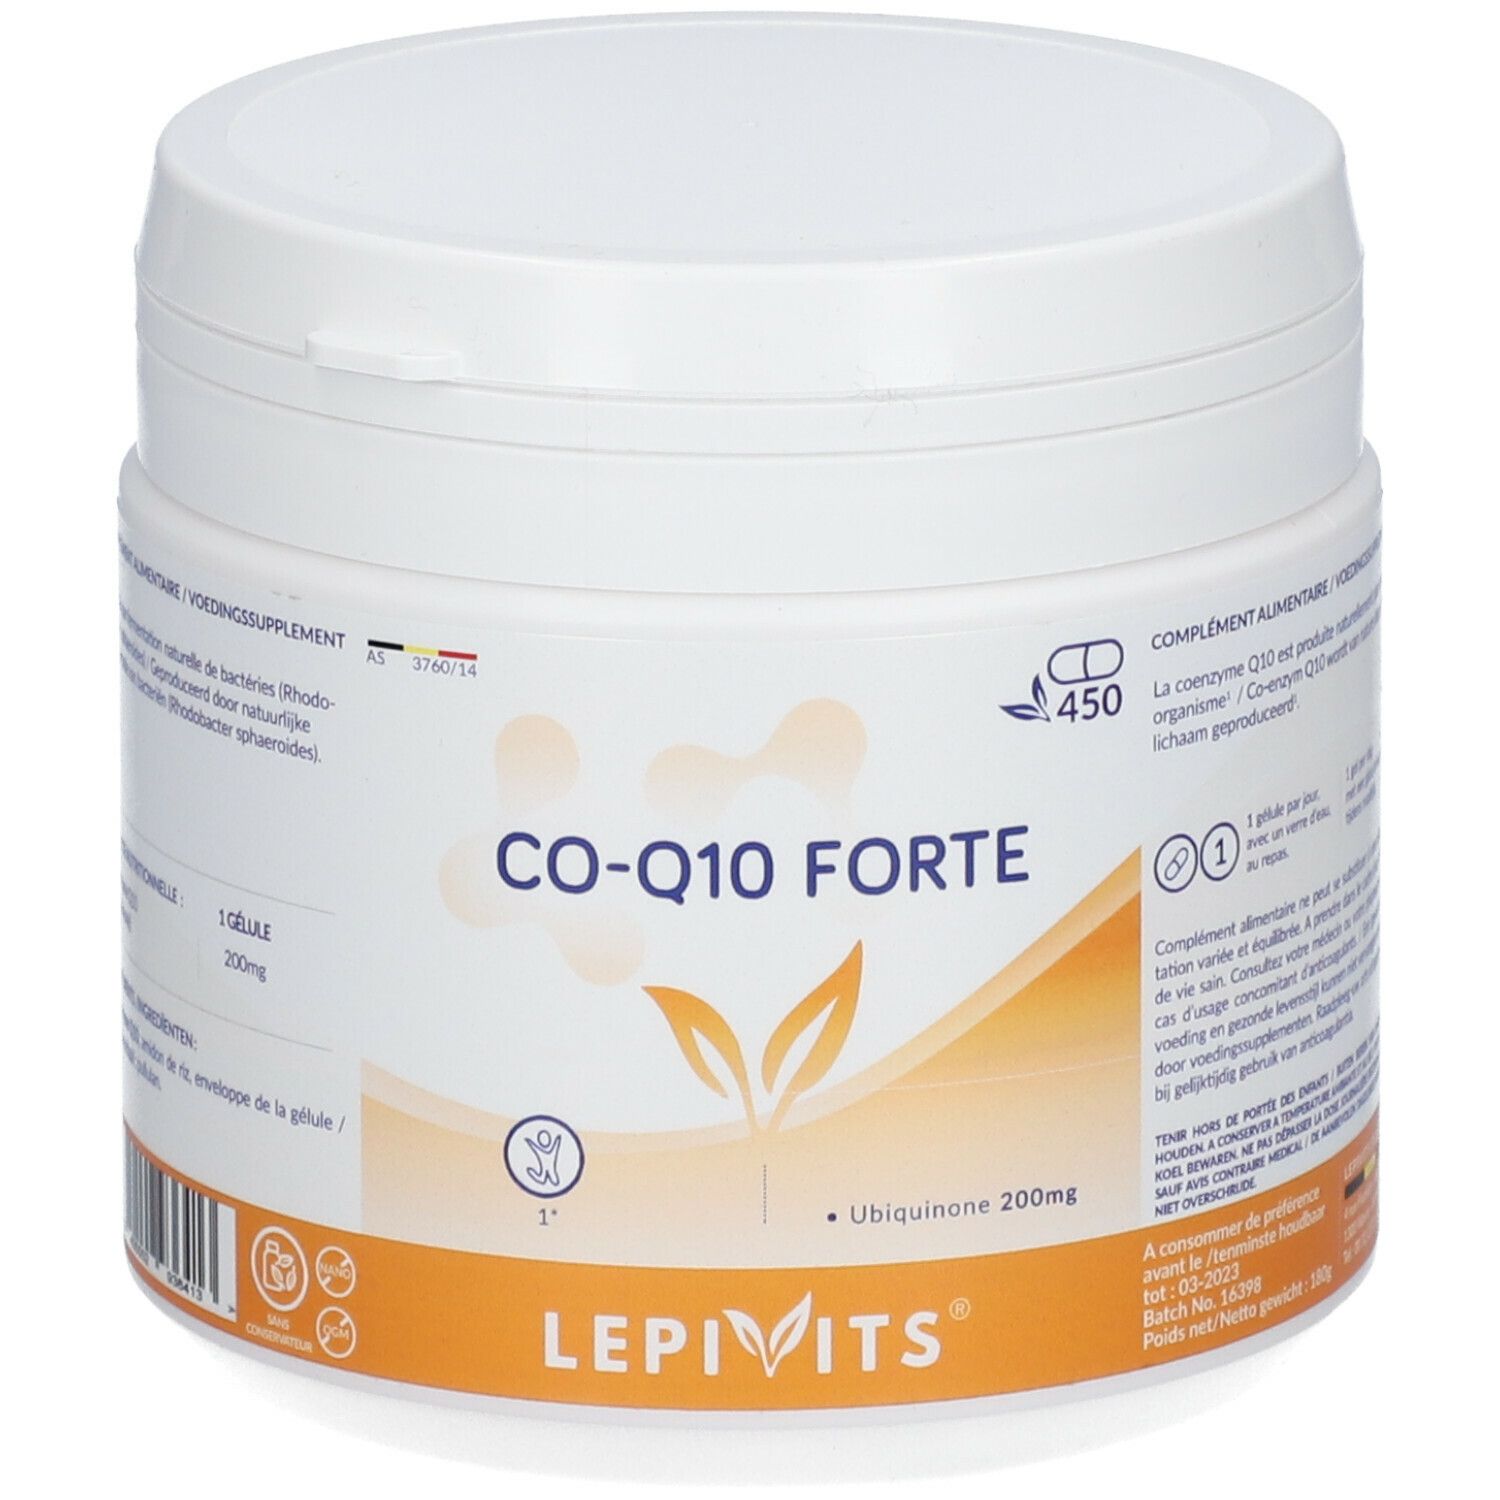 Image of CO-Q10 FORTE 200 mg